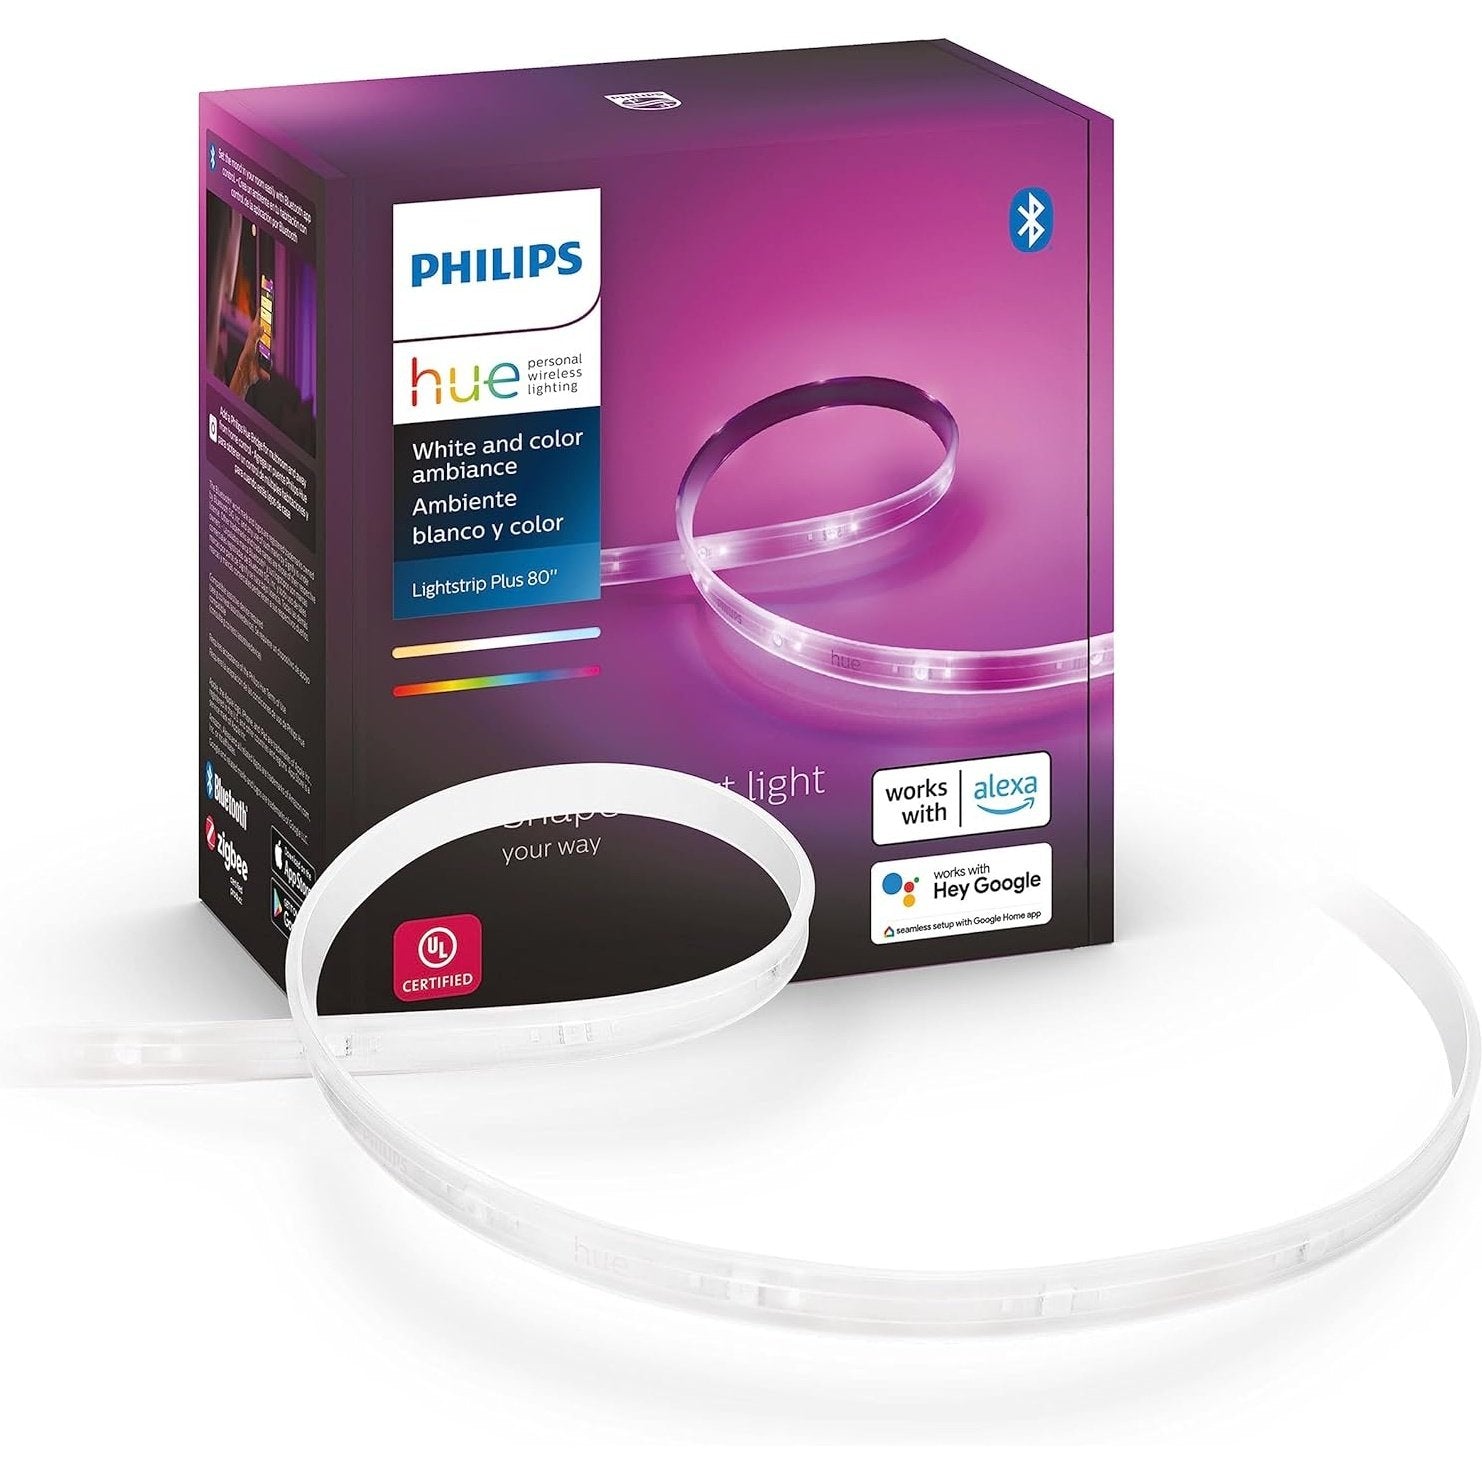 Philips Hue Indoor 6-Foot Smart LED Light Strip Plus Base Kit - Color-Changing Single Color Effect - 1 Pack - Control with Hue App - Works with Alexa, Google Assistant and Apple HomeKit